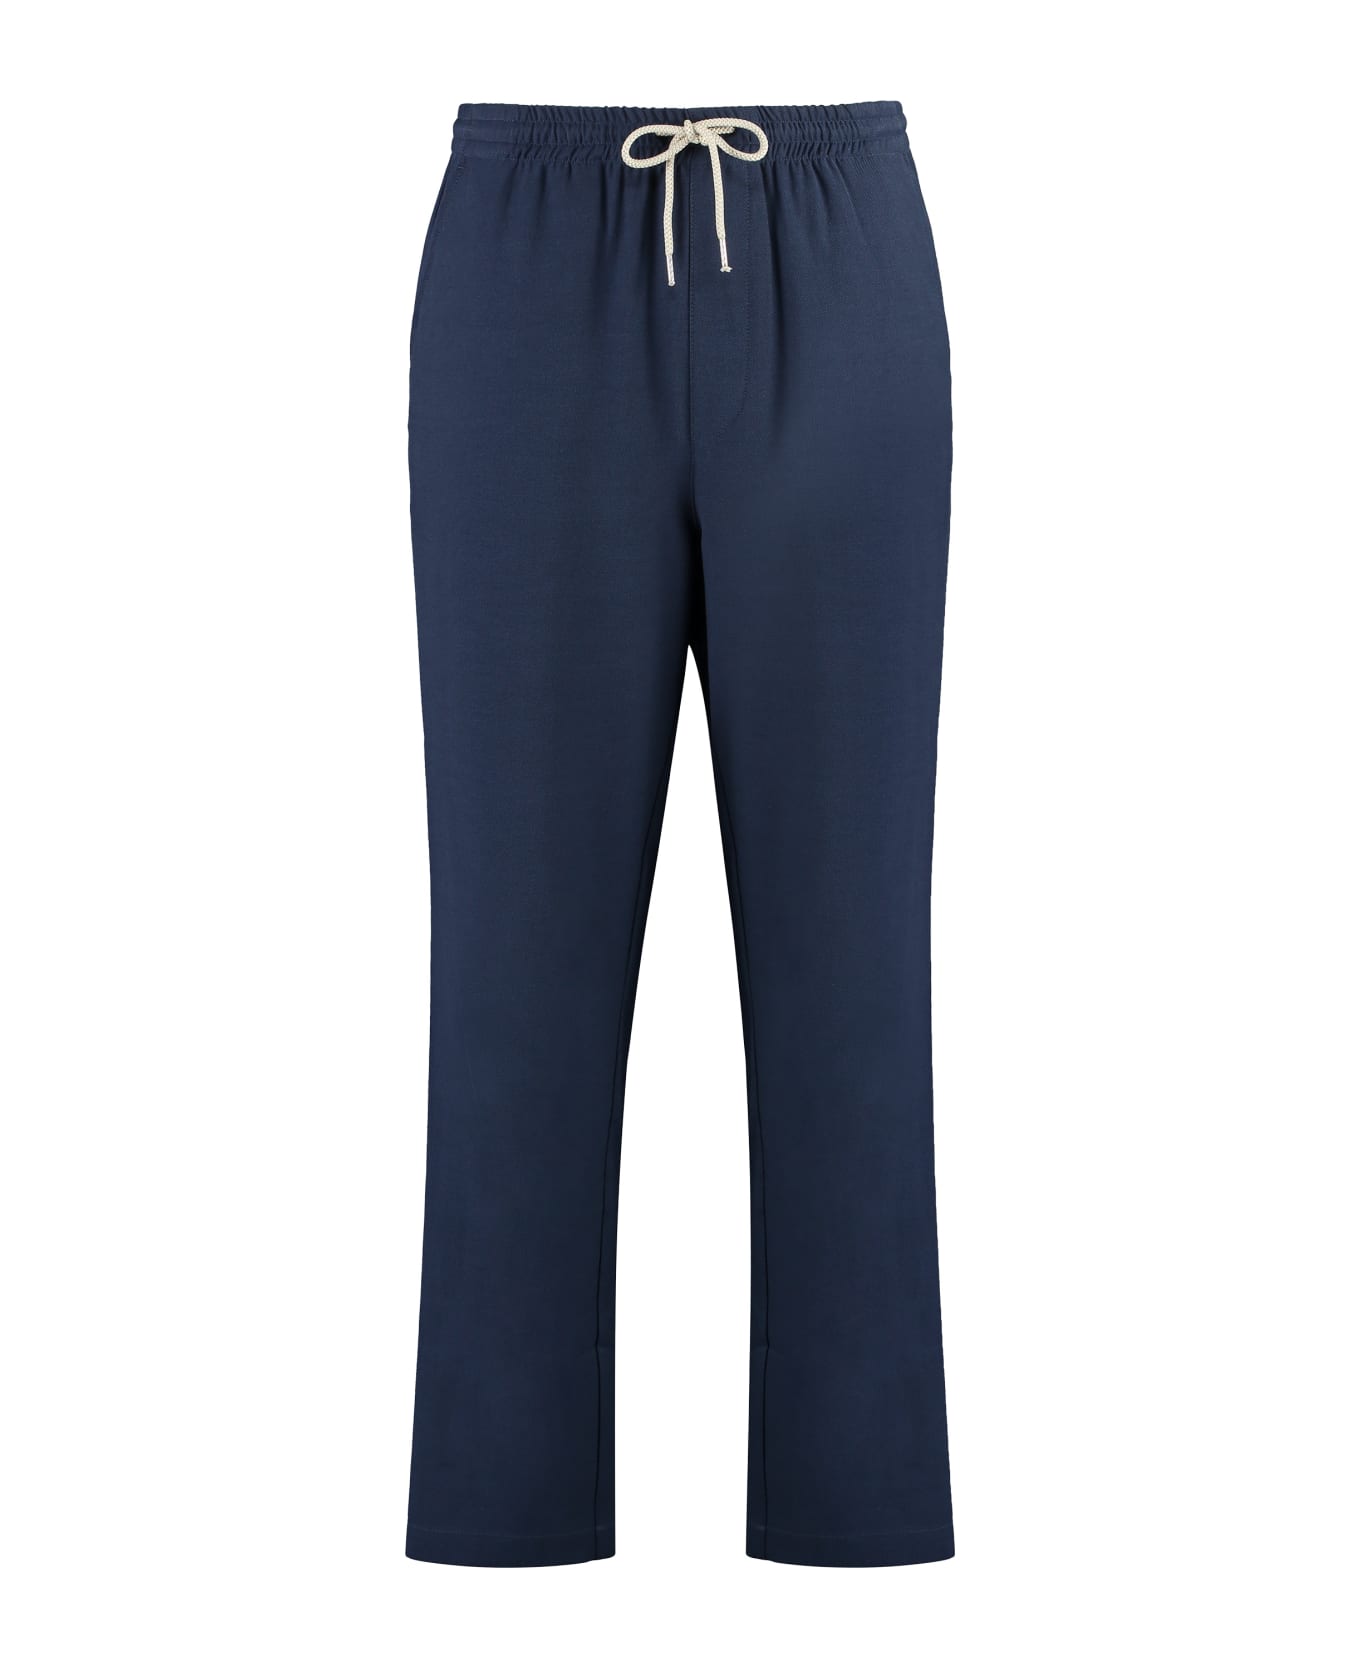 Department Five Brewery Cotton Blend Trousers - blue